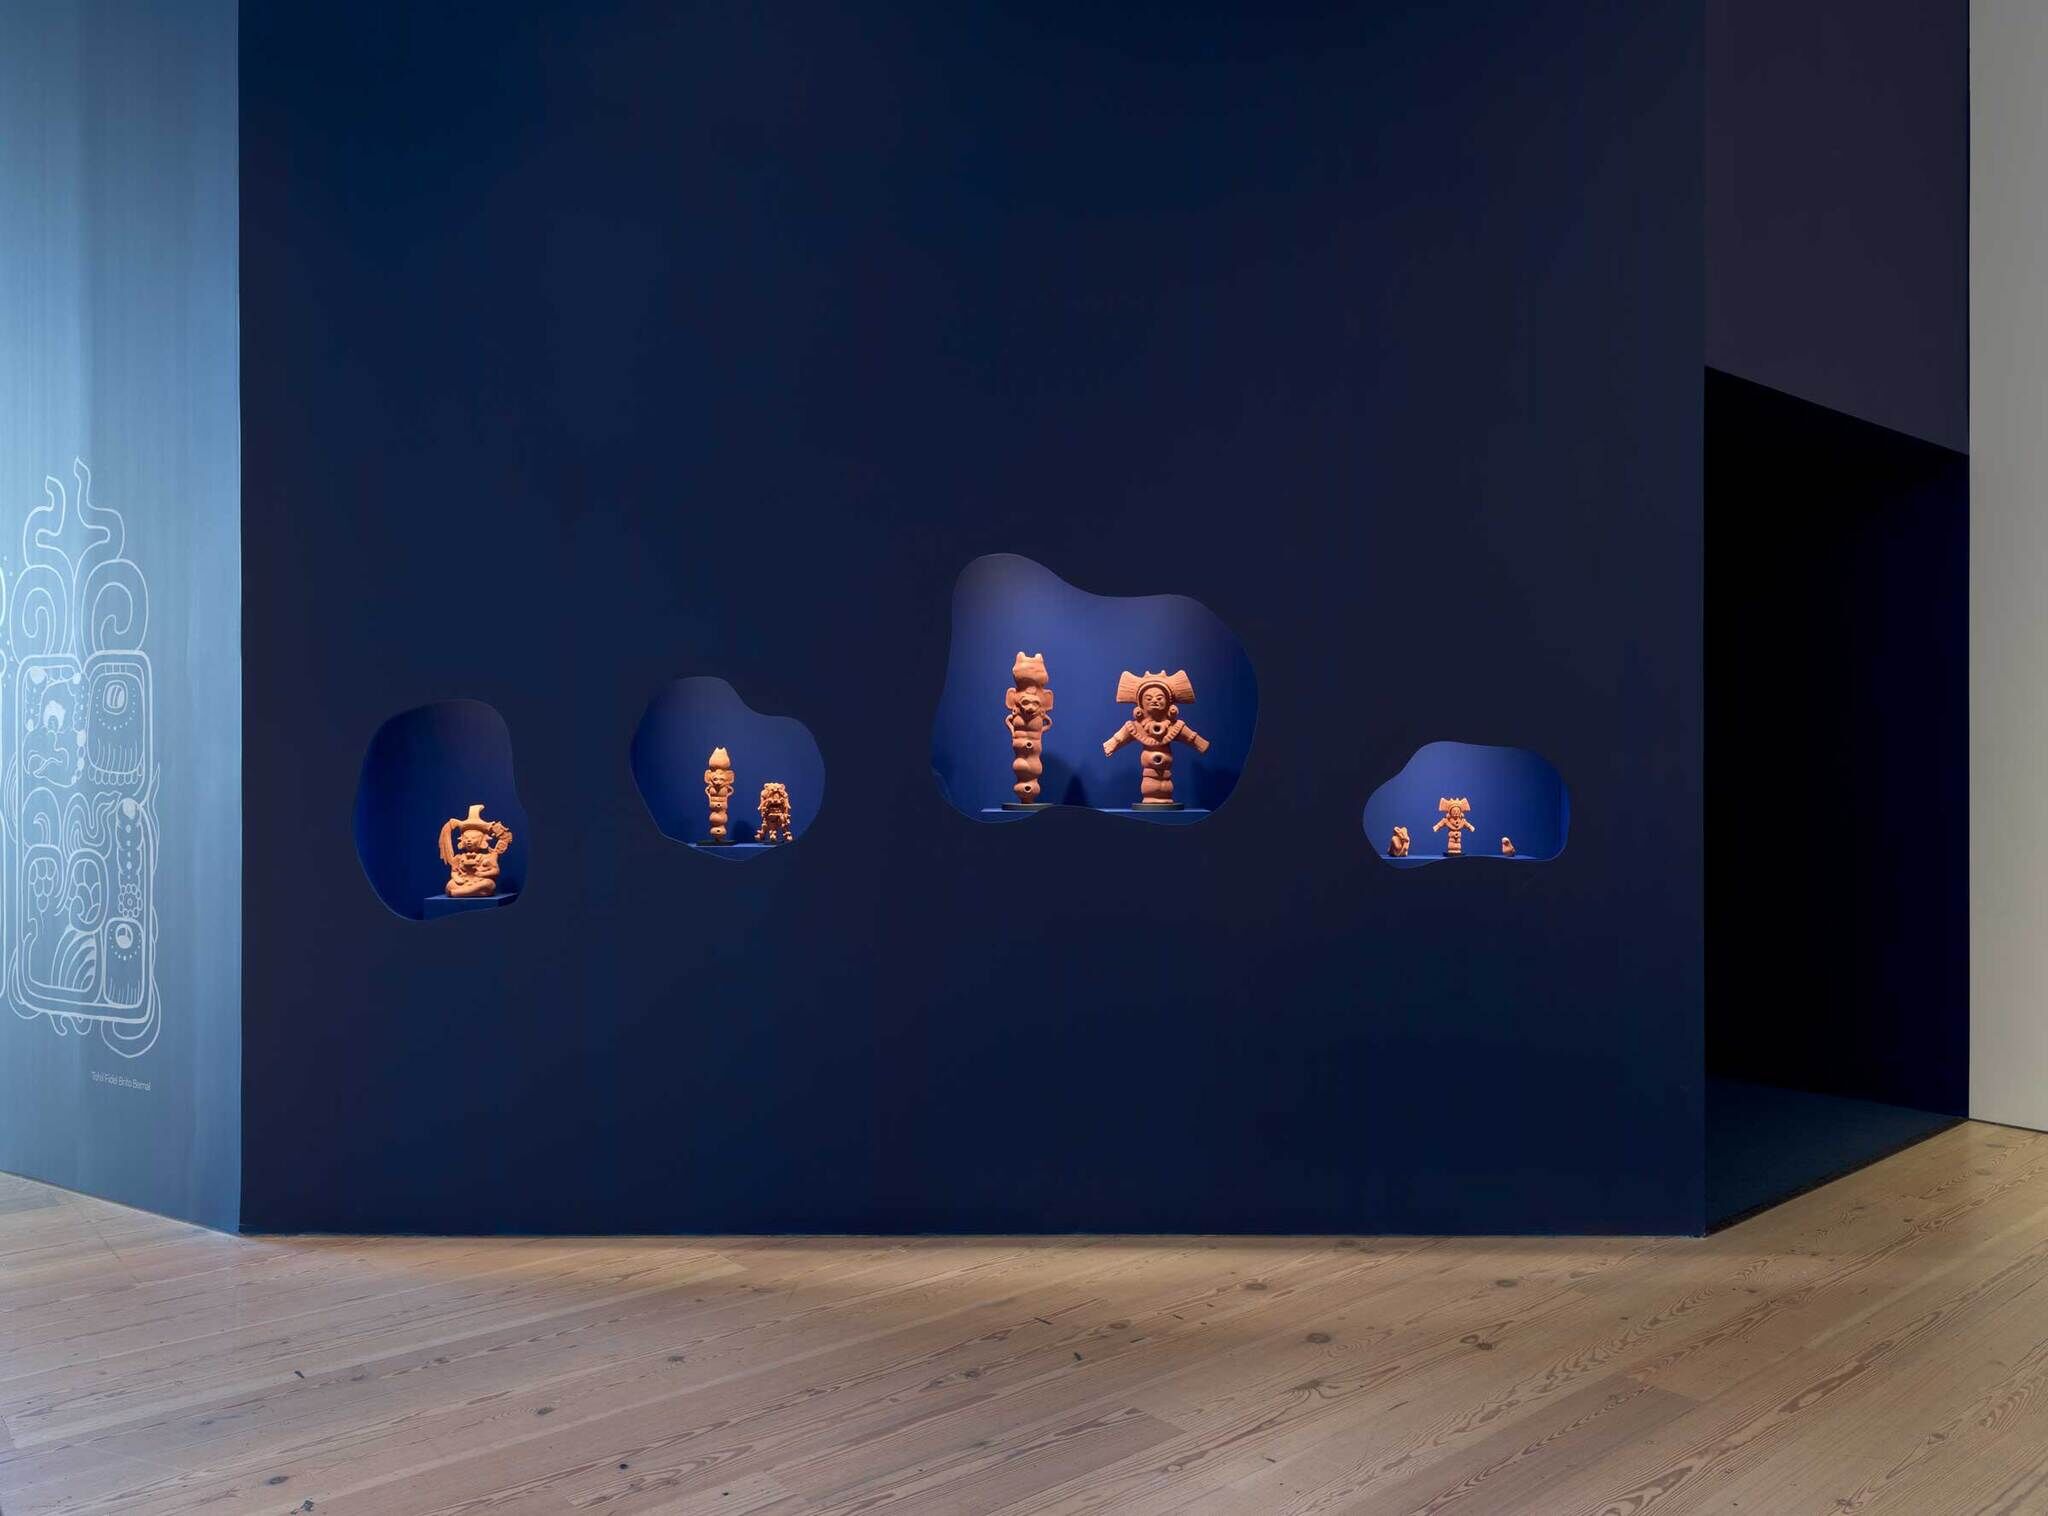 A dark blue gallery wall with irregularly shaped cutouts displaying terracotta sculptures, wooden floor, and a light blue wall with a design on the left.